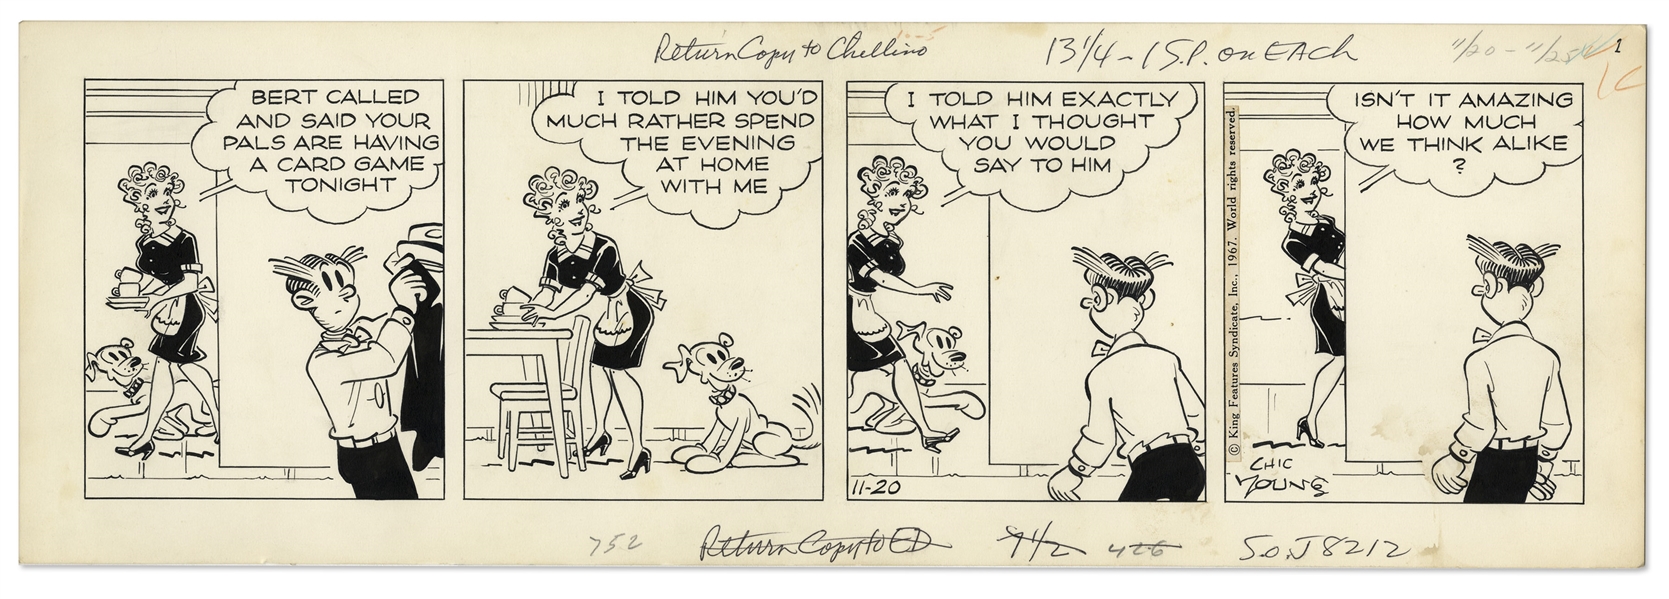 2 Chic Young Hand-Drawn ''Blondie'' Comic Strips From 1967 -- Plus Chic Young's Draft Artwork for Both Strips